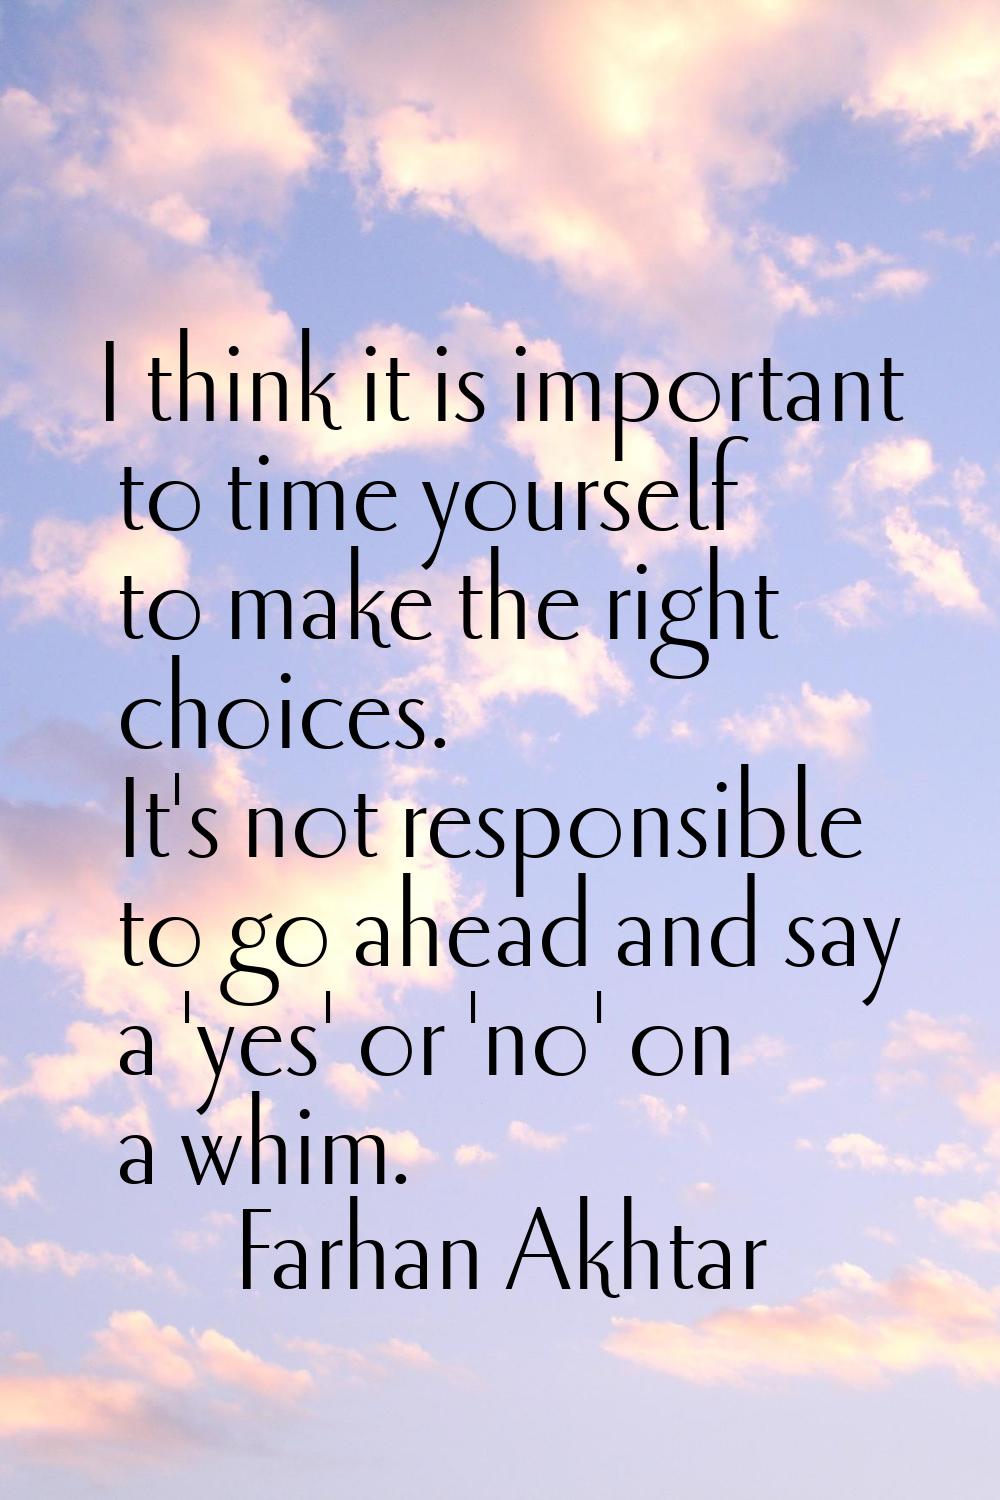 I think it is important to time yourself to make the right choices. It's not responsible to go ahea